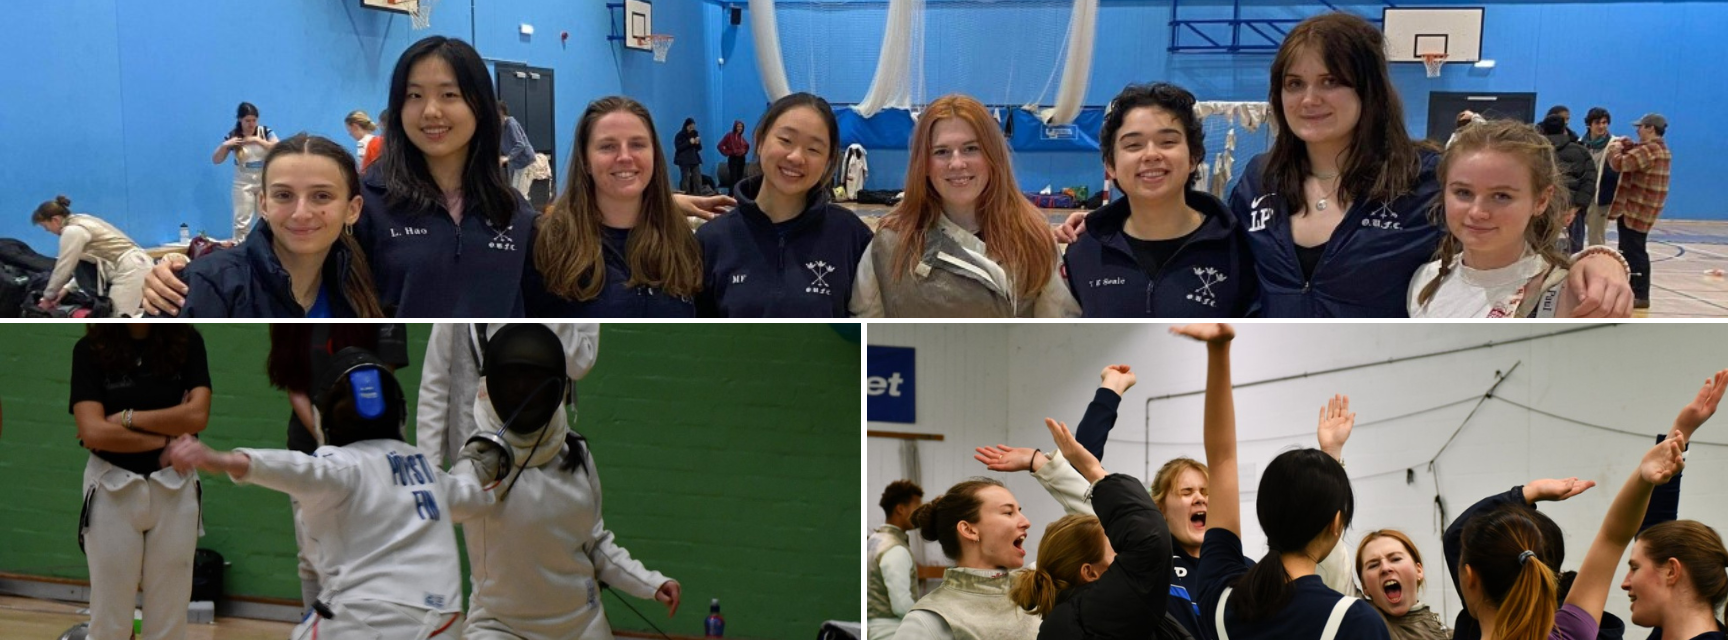 Women's Fencing Blues collage of images of the team from 2022/23 season